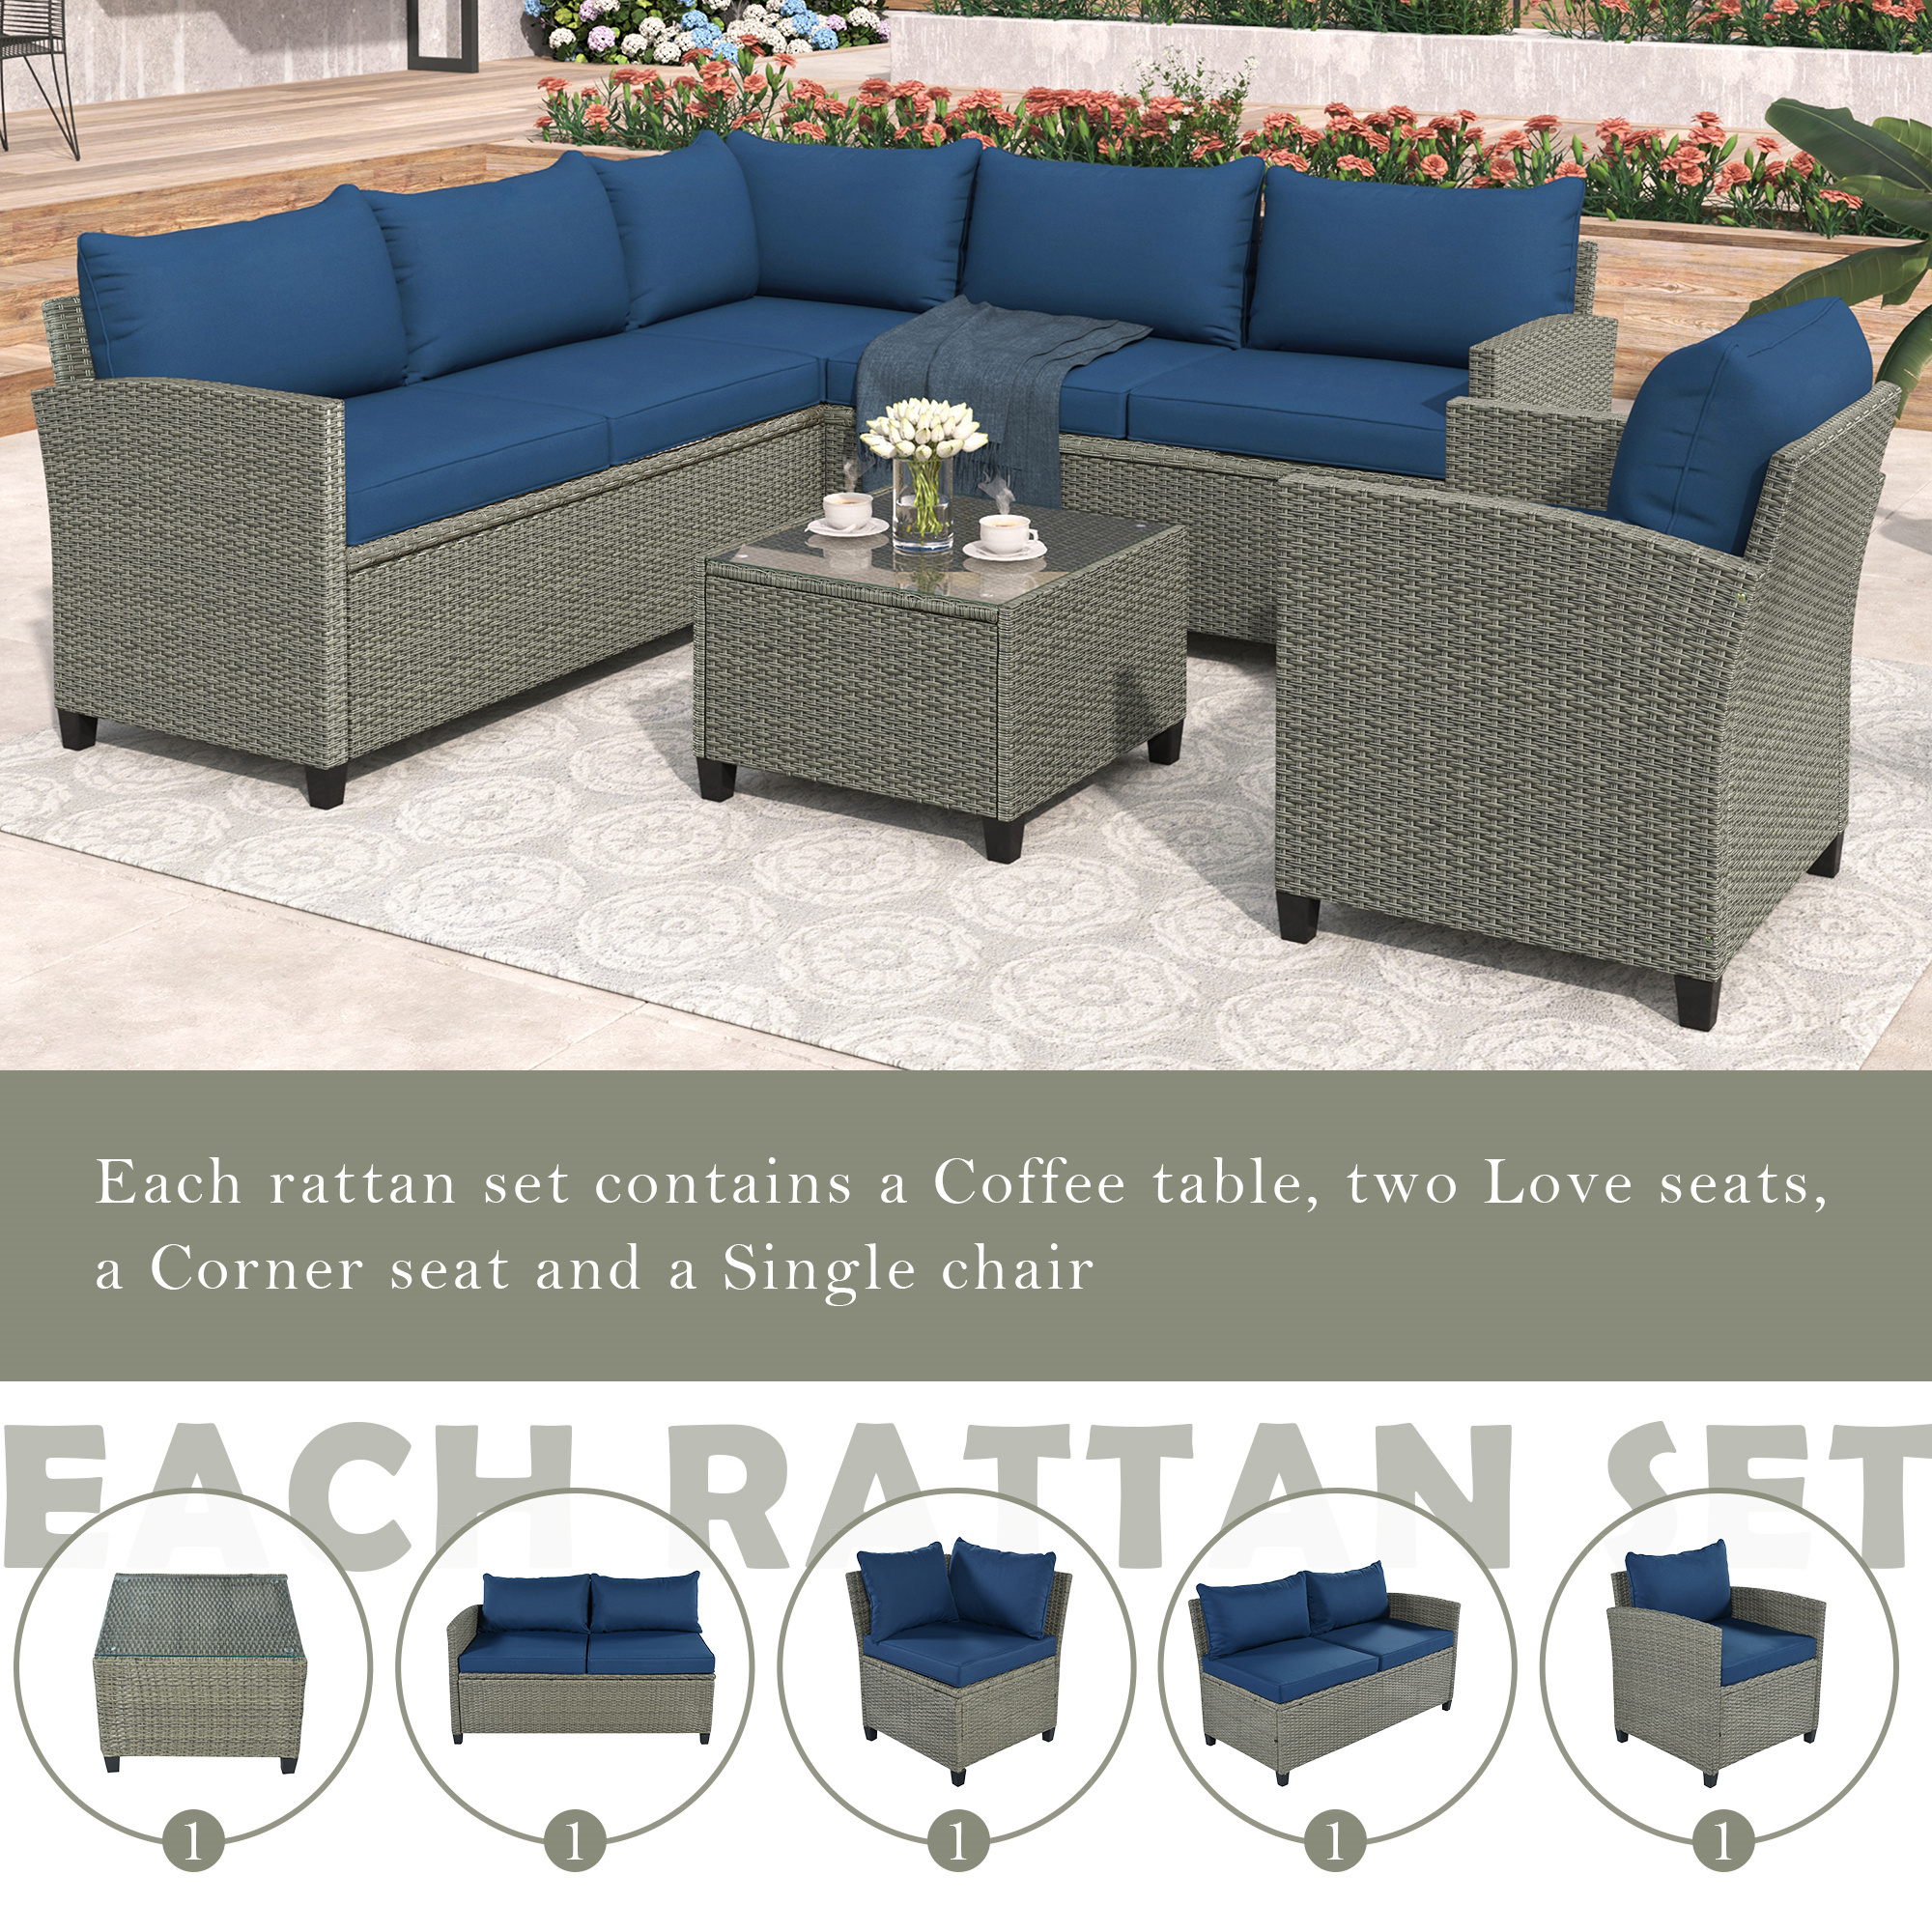 Cfowner 5-Piece Patio Furniture Sets, Outdoor Conversation Set with Coffee Table, Cushions and Single Chair, Garden Furniture Sofa Set for Garden Balcony Poolside - image 3 of 9